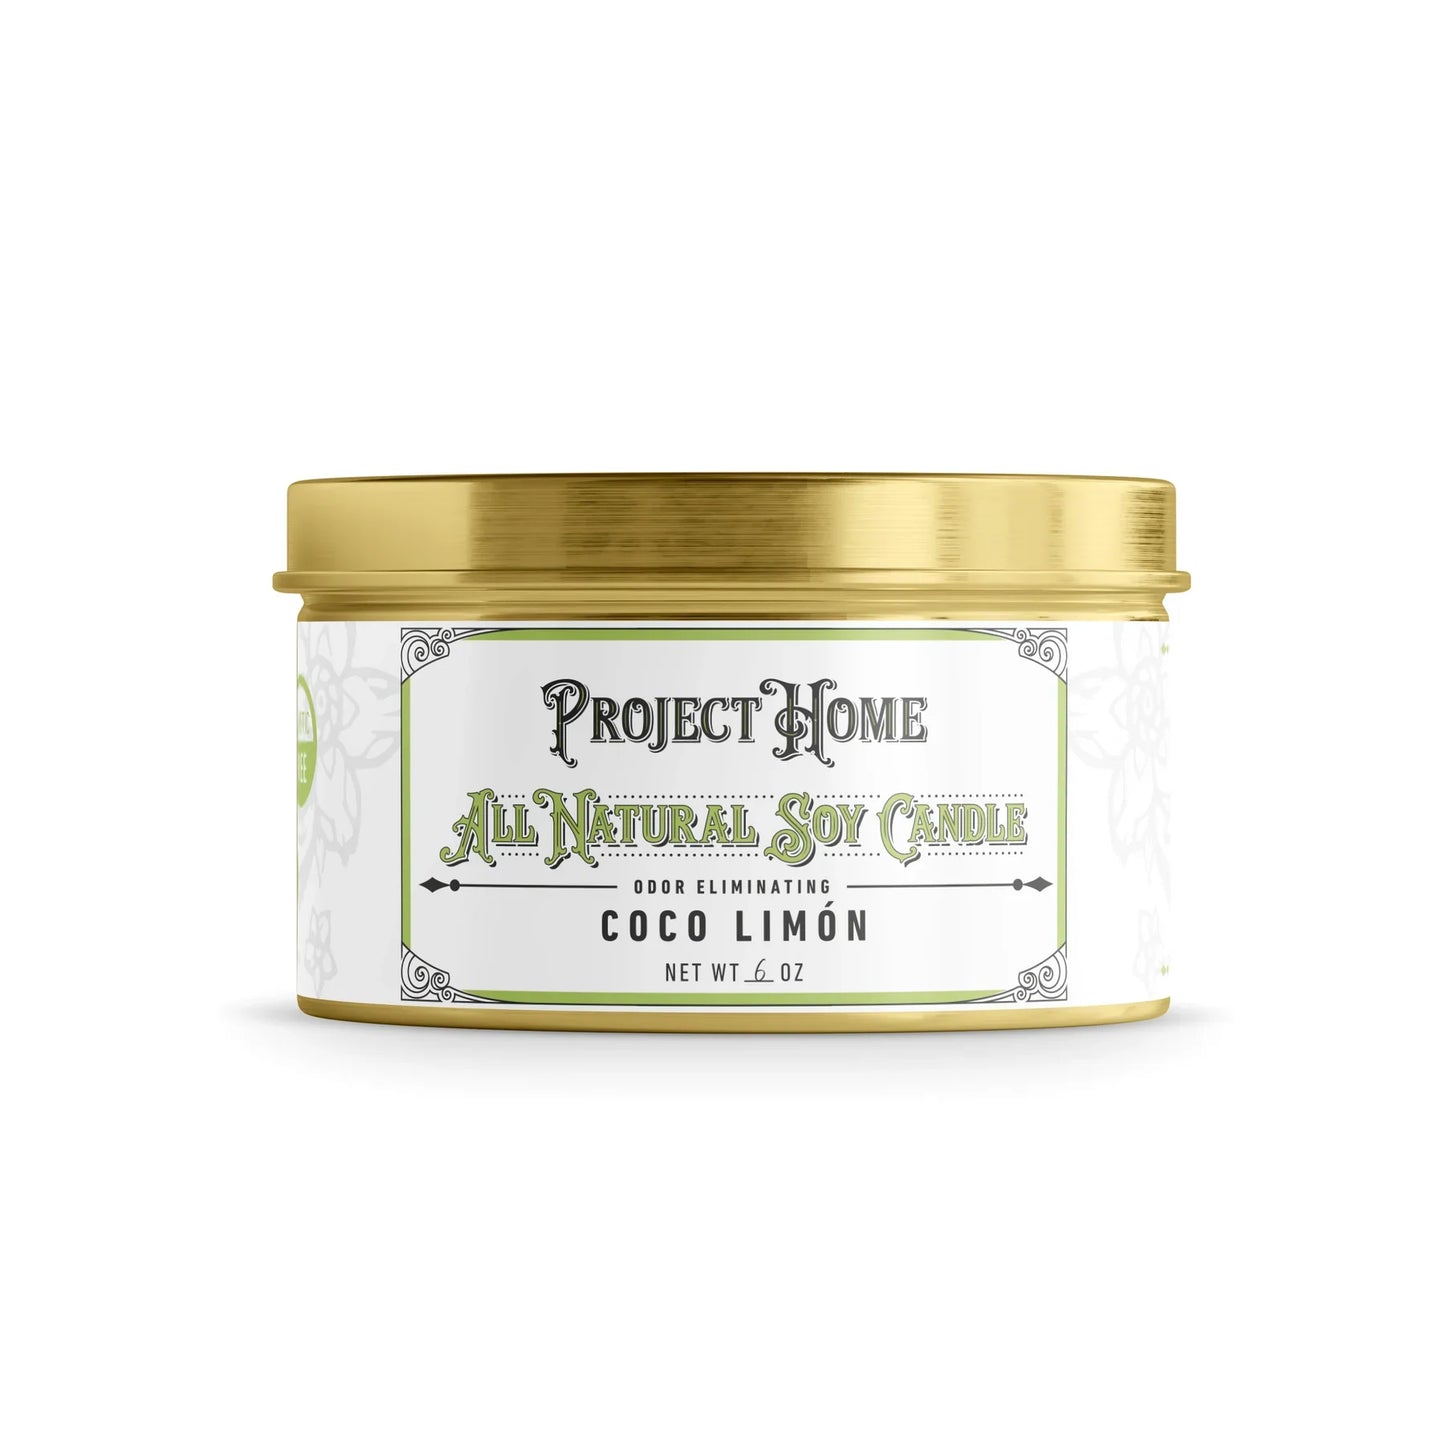 Project Sudz Pet Odor Fighting Soy Candle - Coco Limon 6 oz